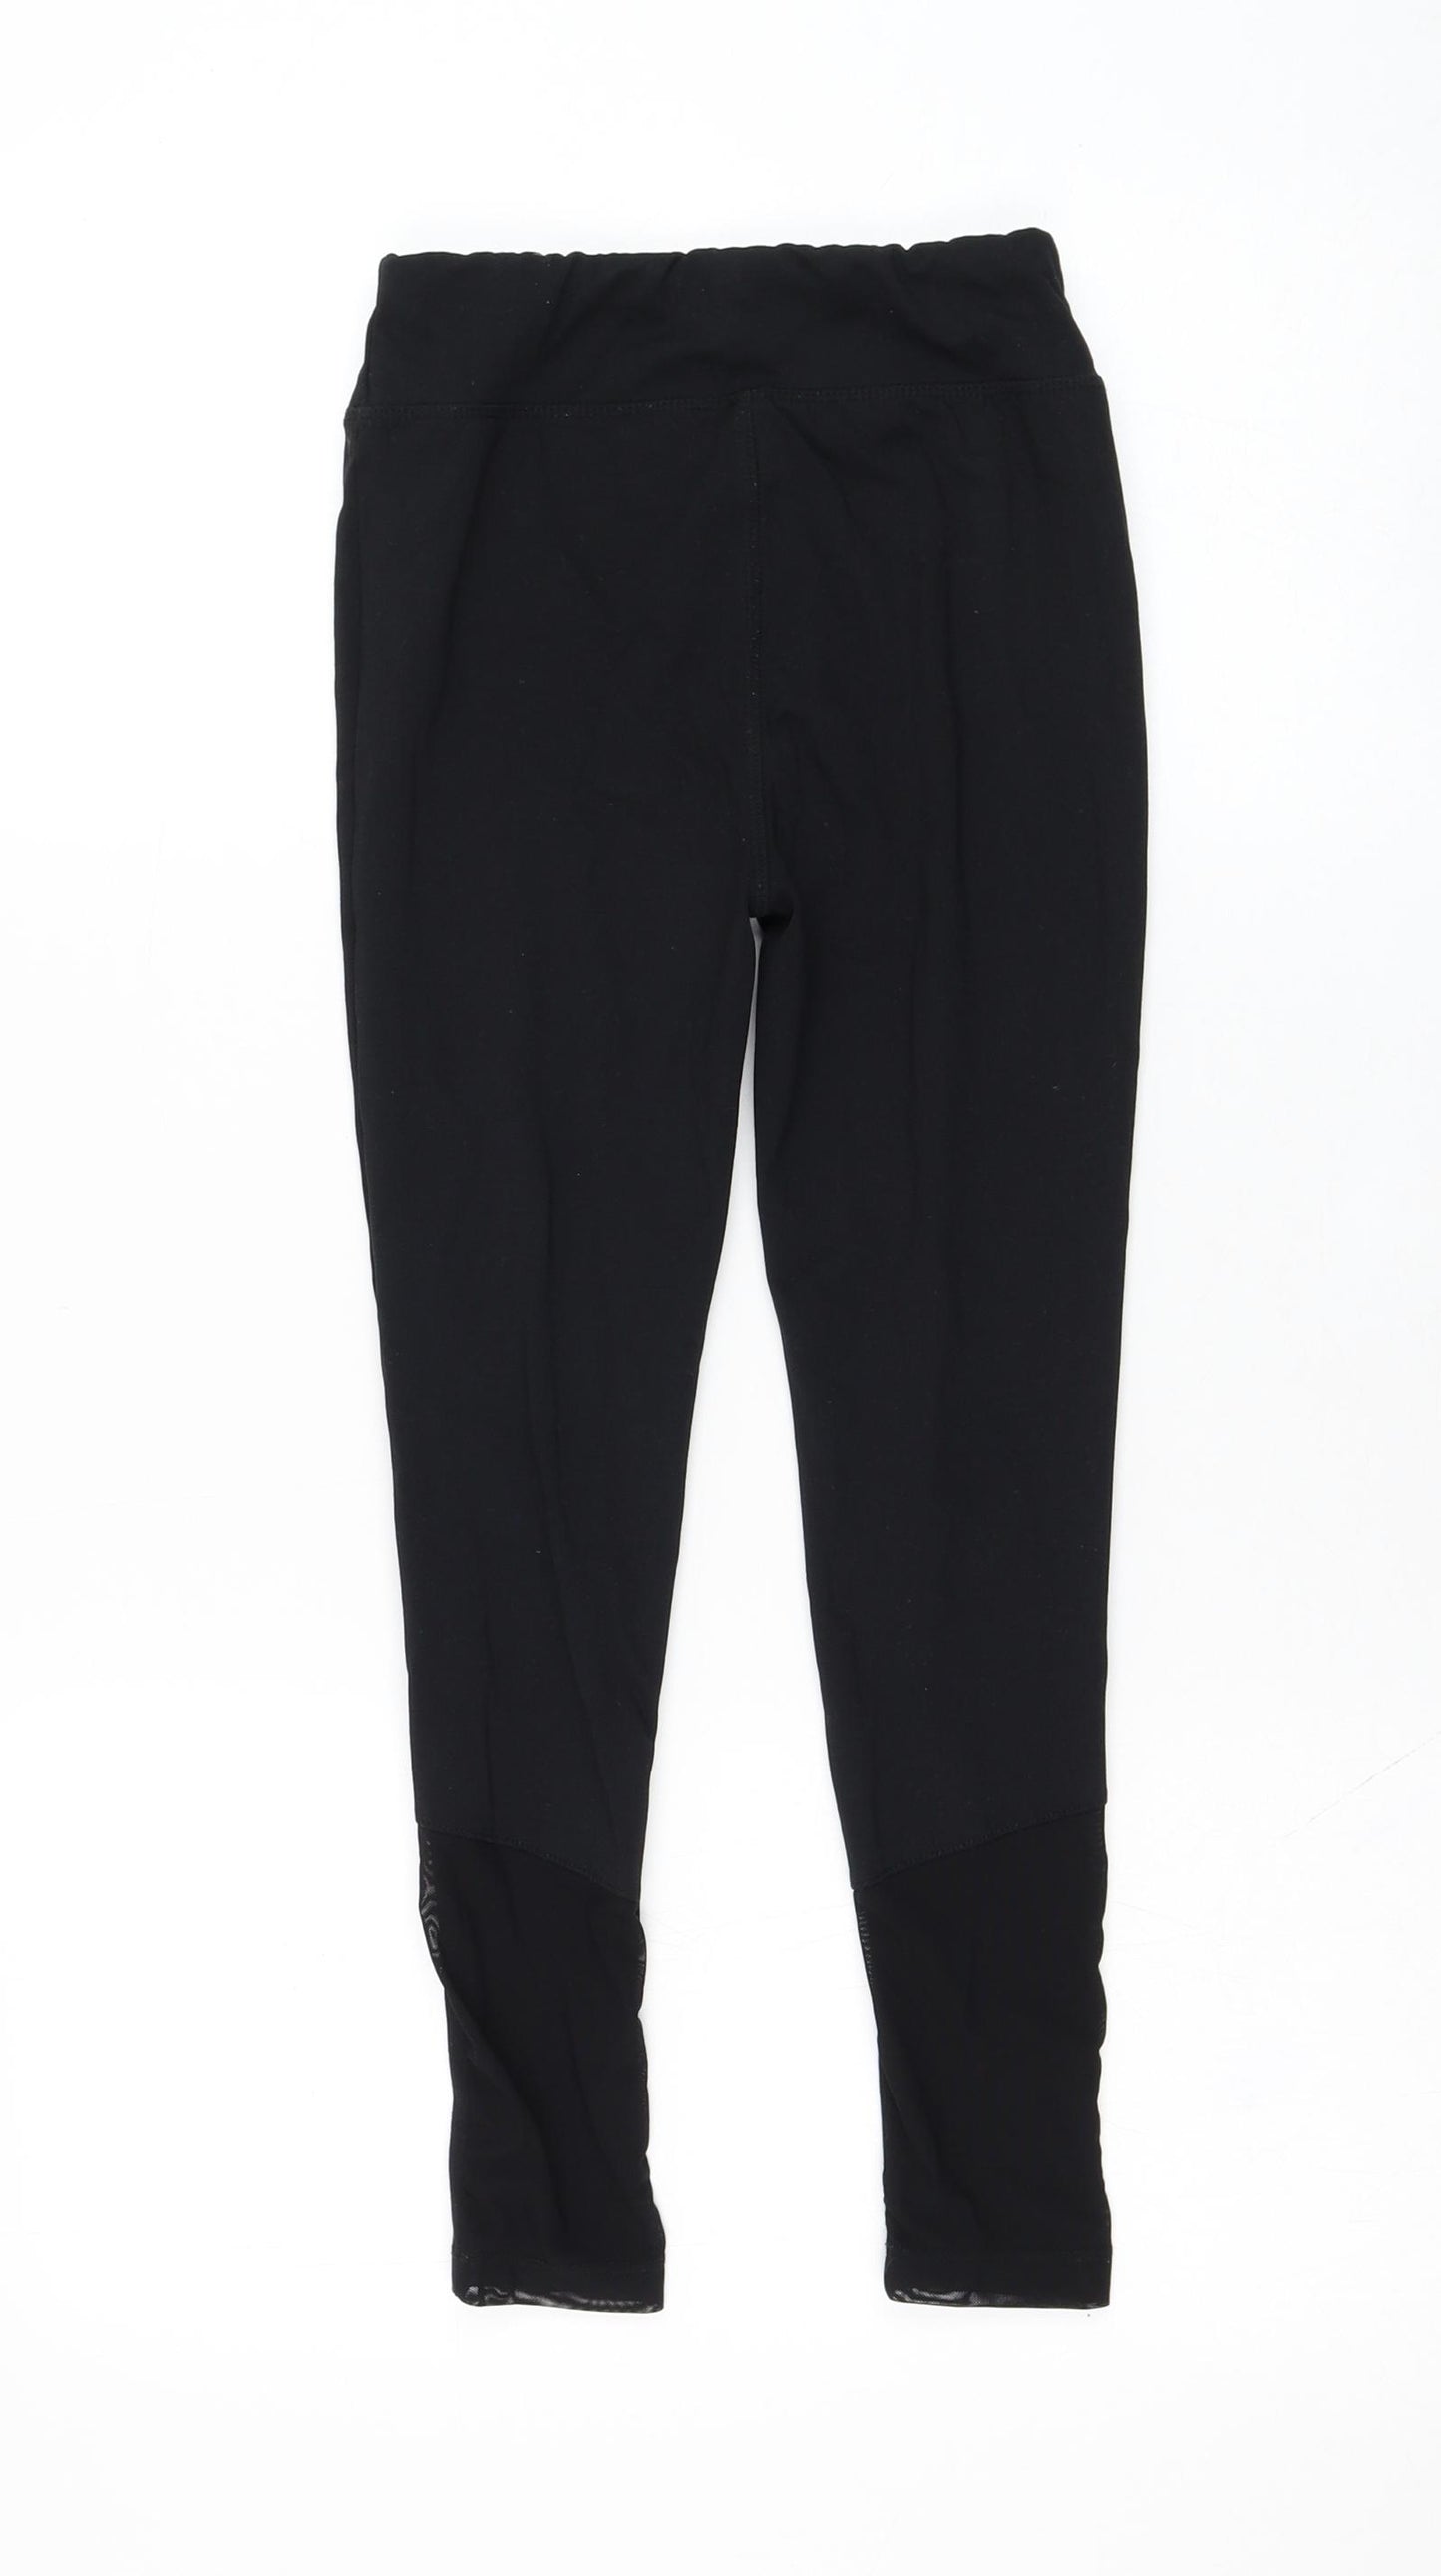 Dunnes Stores Girls Black  Polyester Jogger Trousers Size 9 Months  Regular Pullover - Leggings, Mesh accent